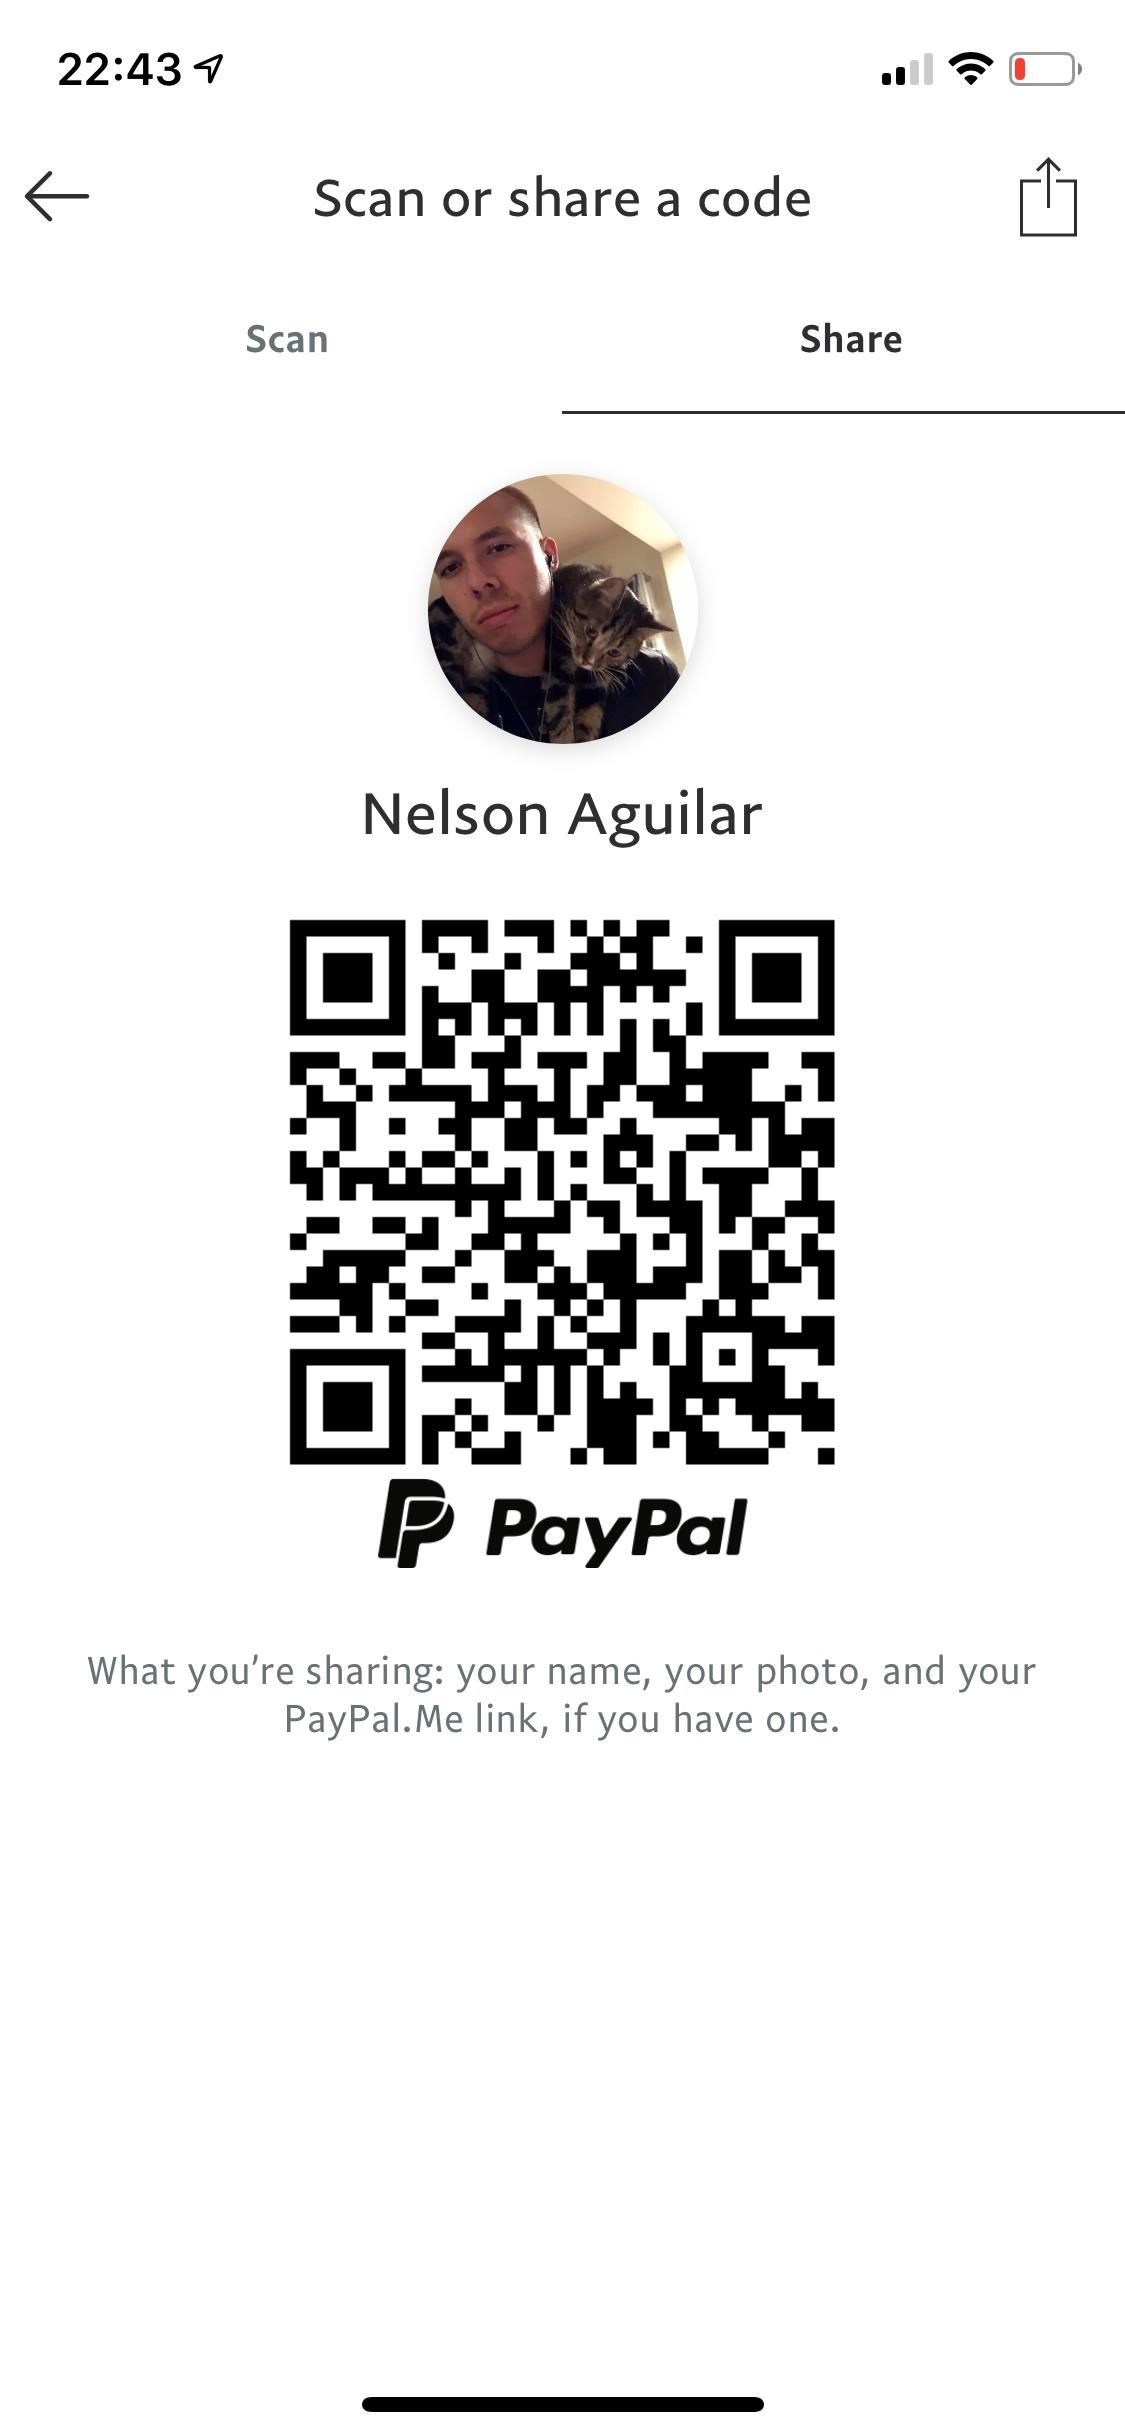 share scan paypal qr codes for faster transactions when receiving sending money.w1456